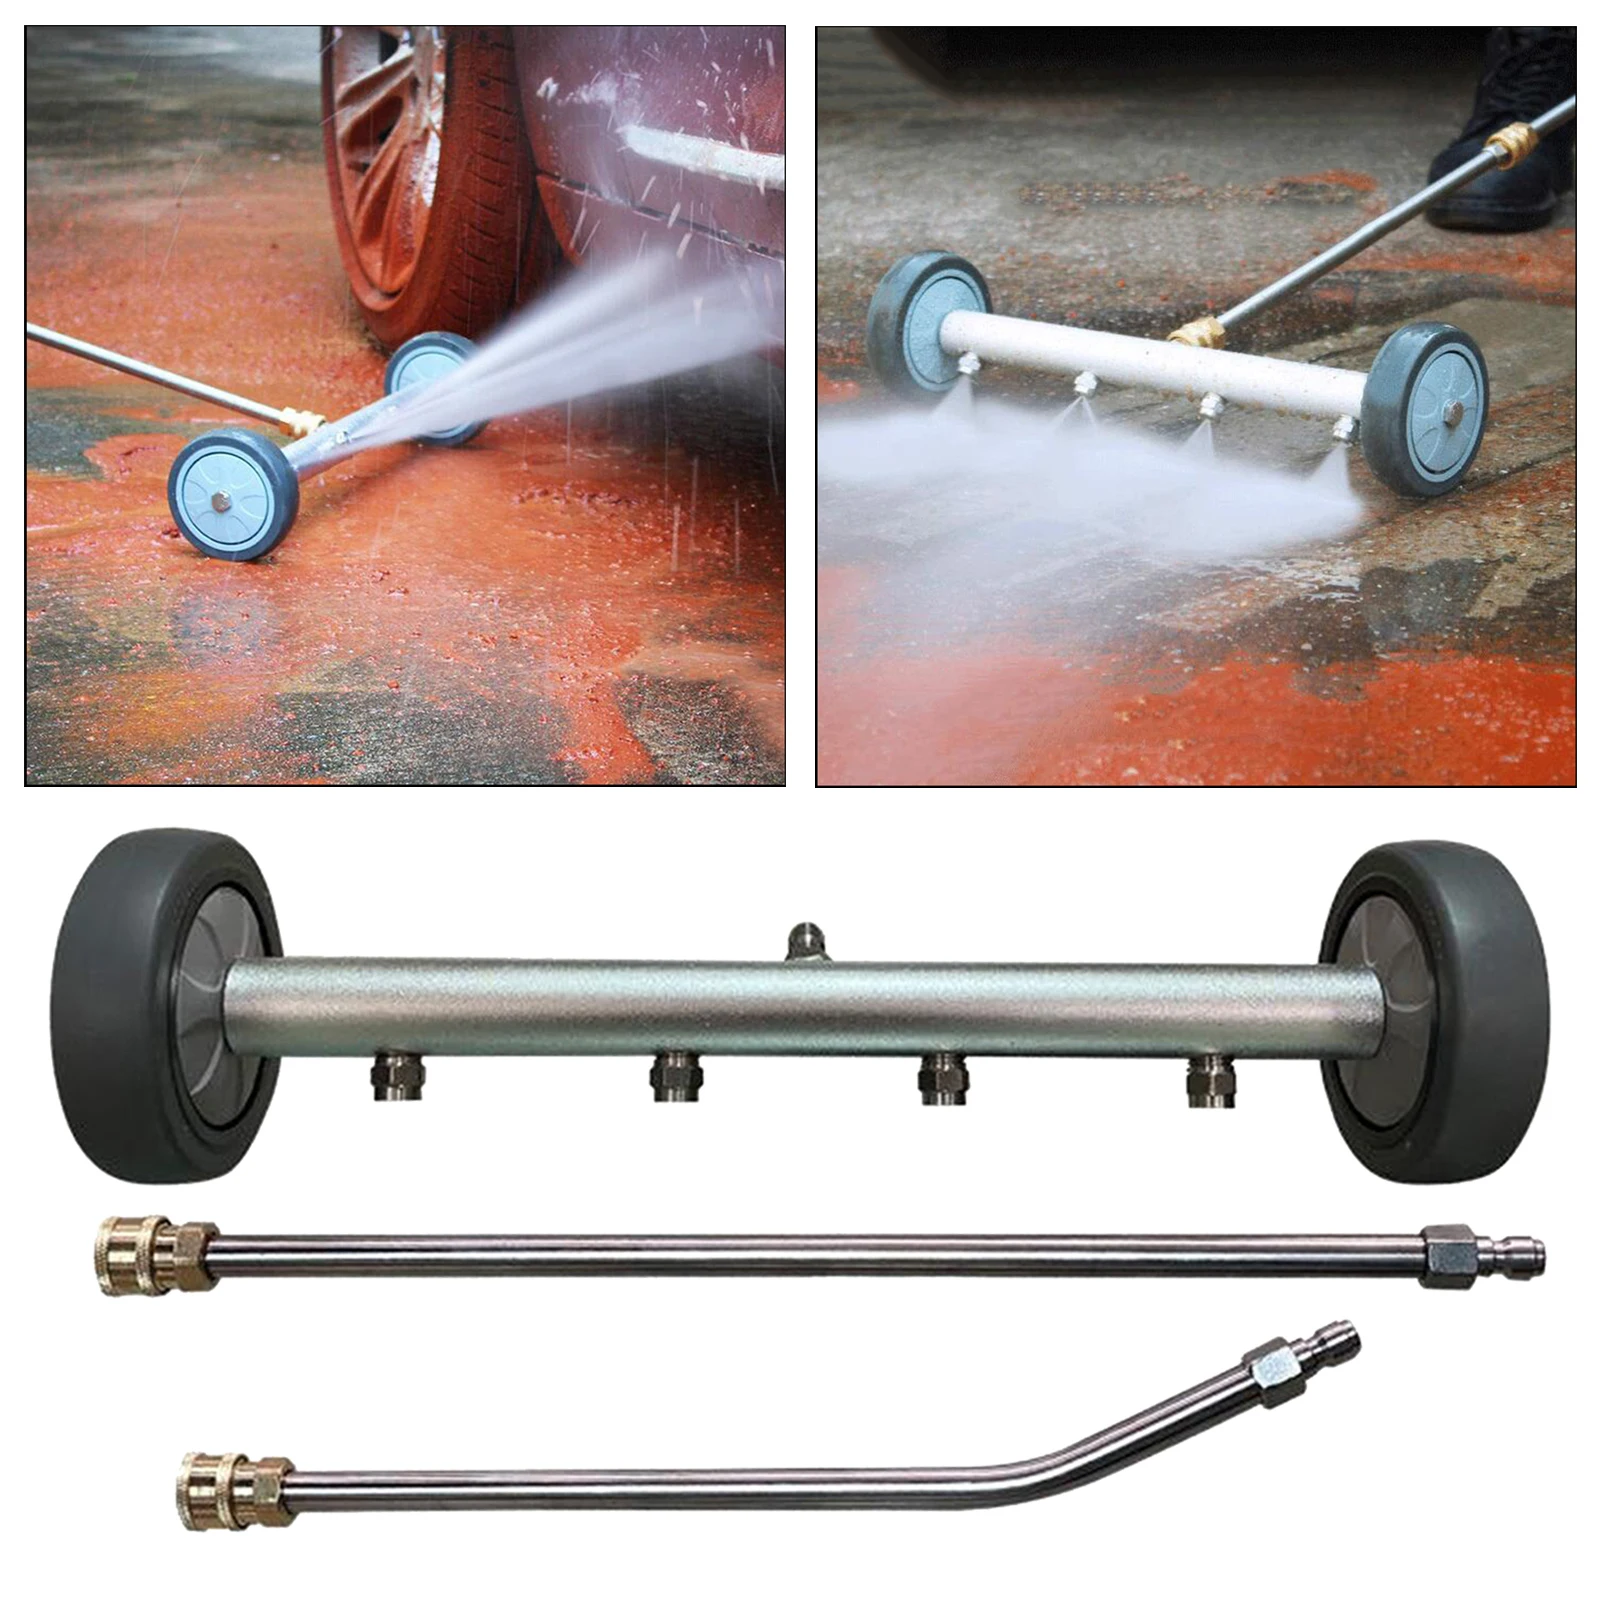 Undercarriage Cleaner Under Car Washing Water Brooms with Extension Rods for Pressure Washer